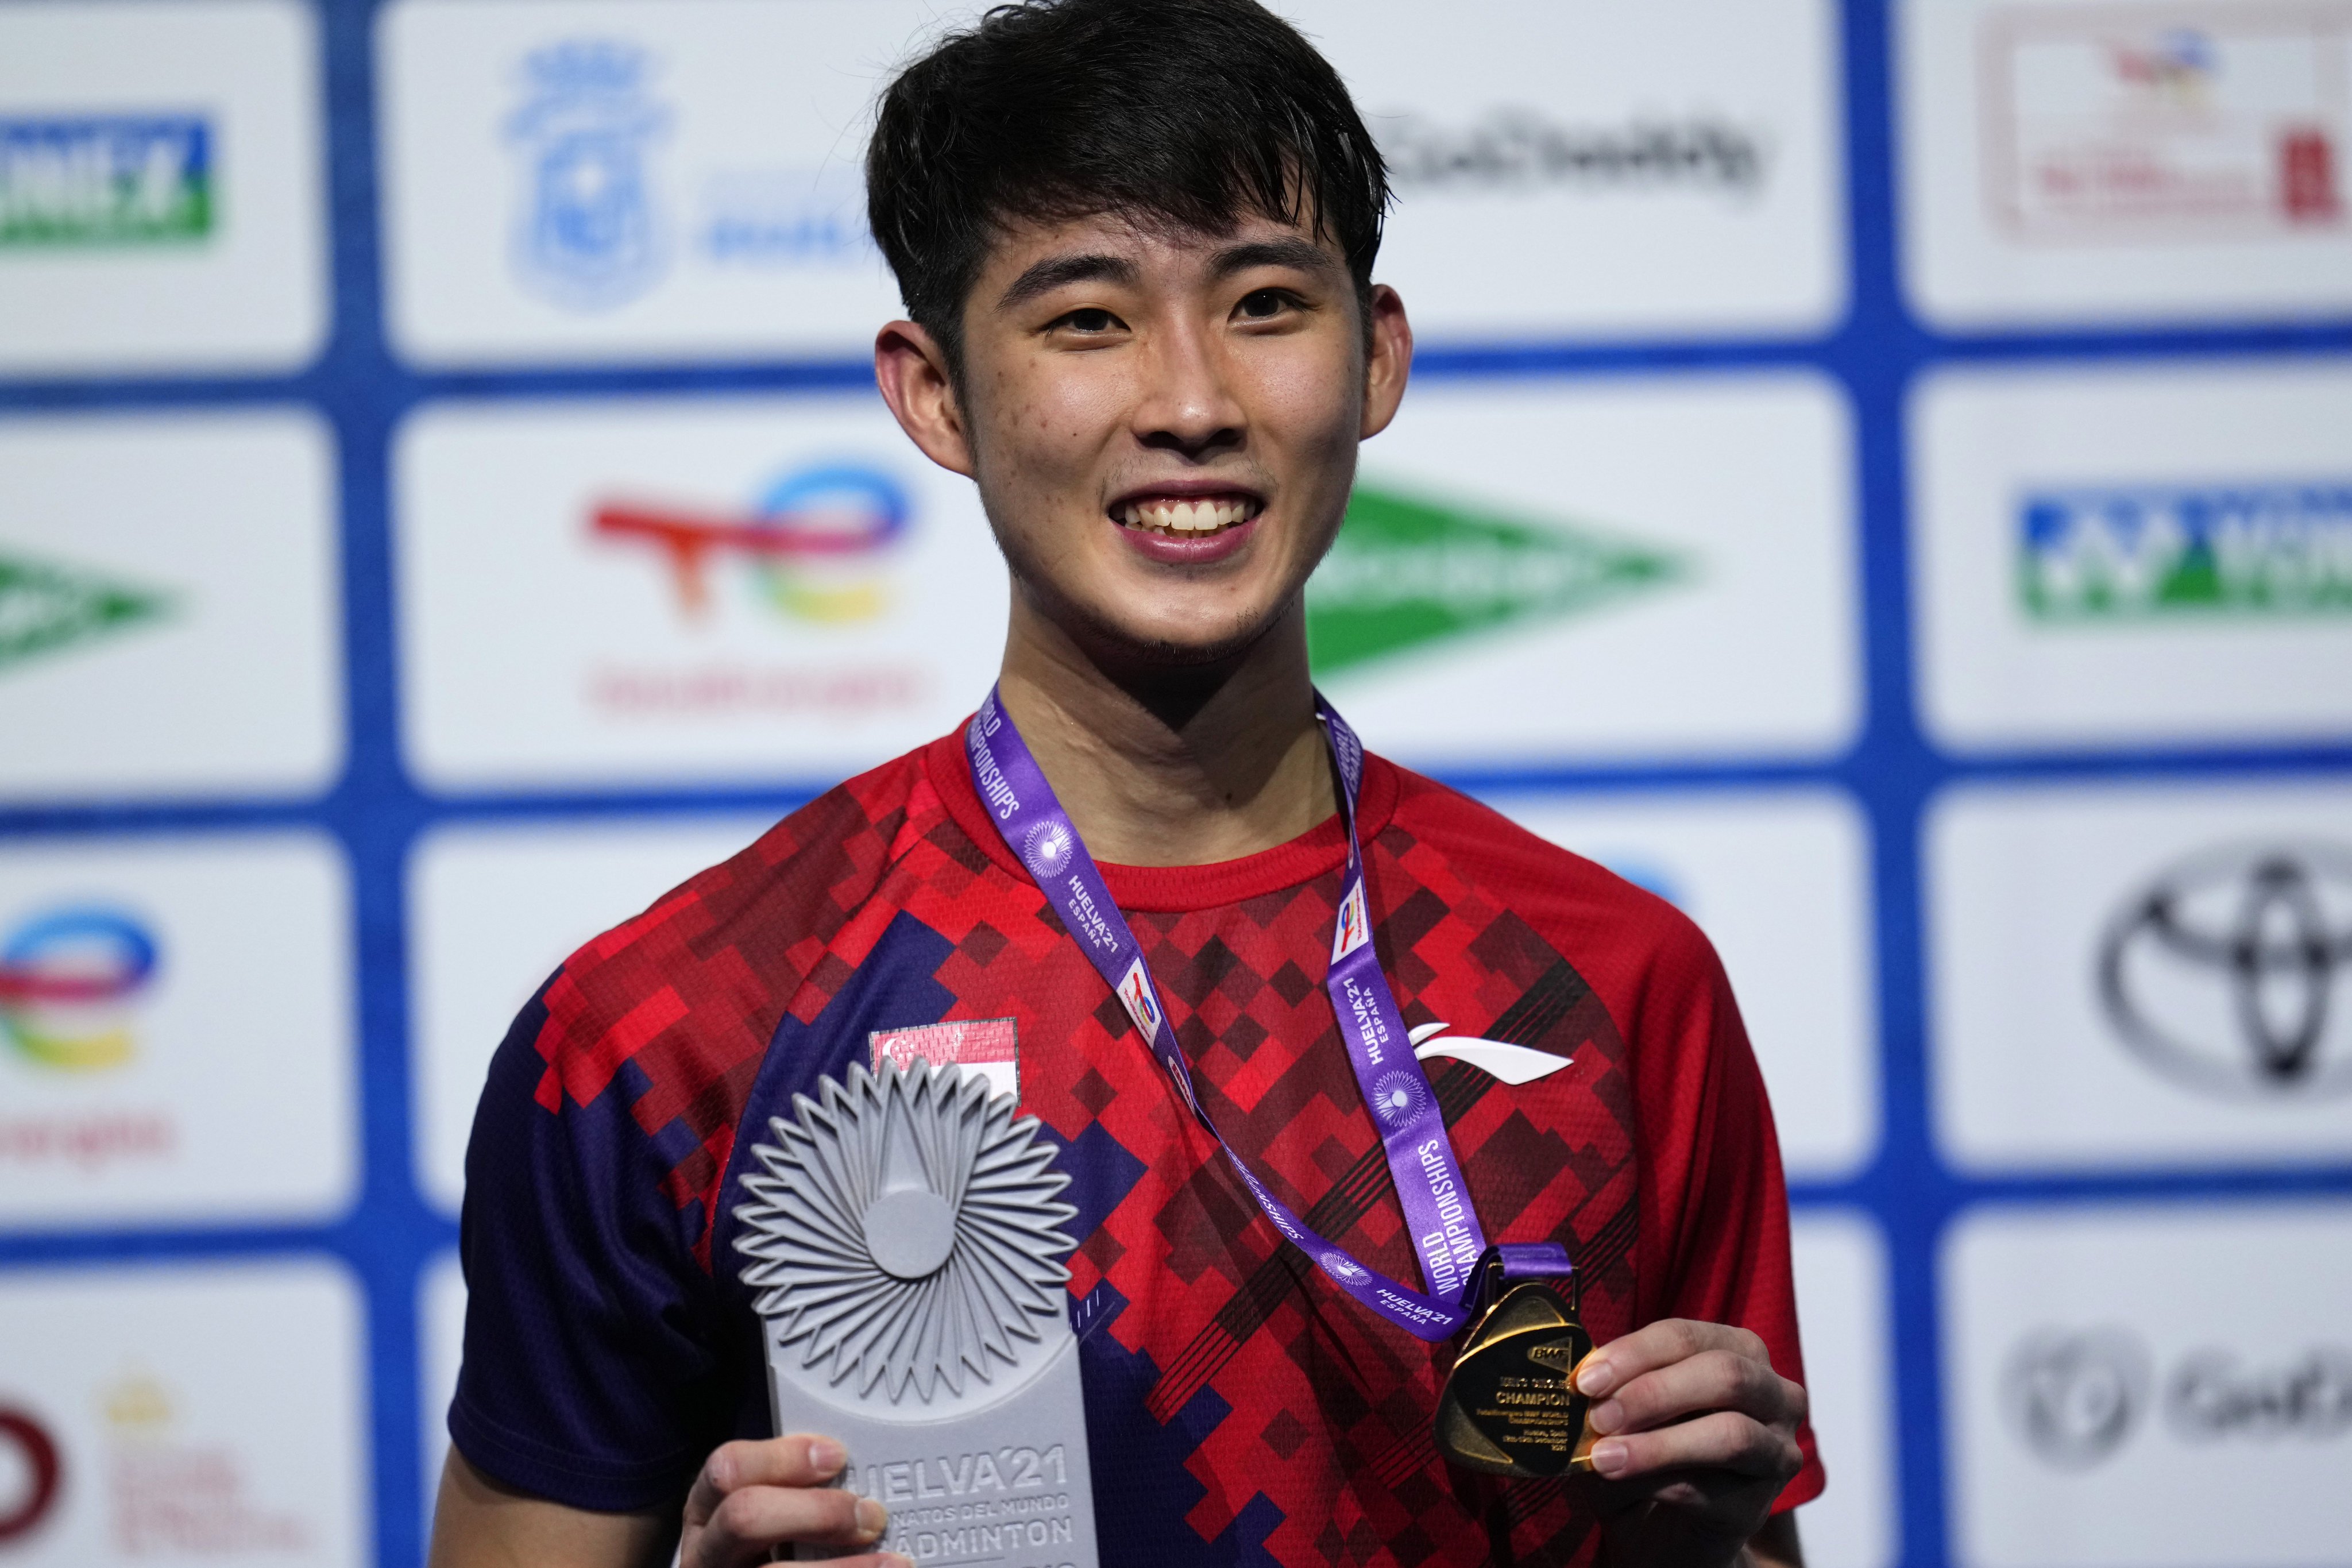 Singapore’s Loh Kean Yew with his gold medal after beating Kidambi Srikanth of India in the men’s singles badminton final event at the BWF World Championships in Huelva in Spain. Photo: AP   